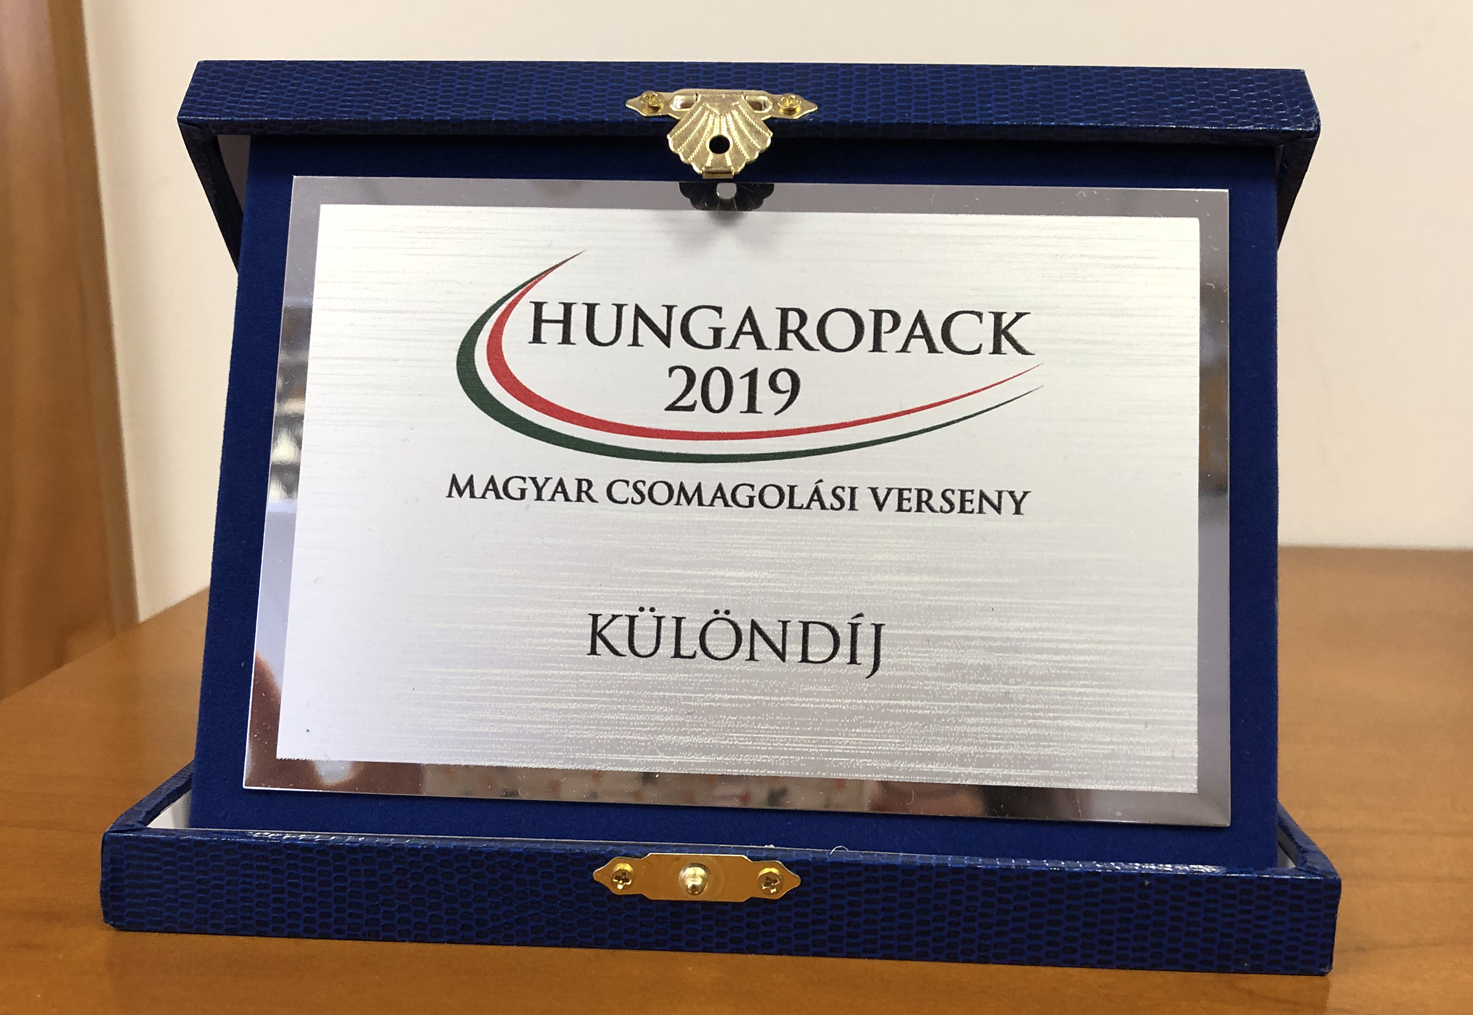 WE WON A SPECIAL AWARD AT HUNGAROPACK COMPETITION!